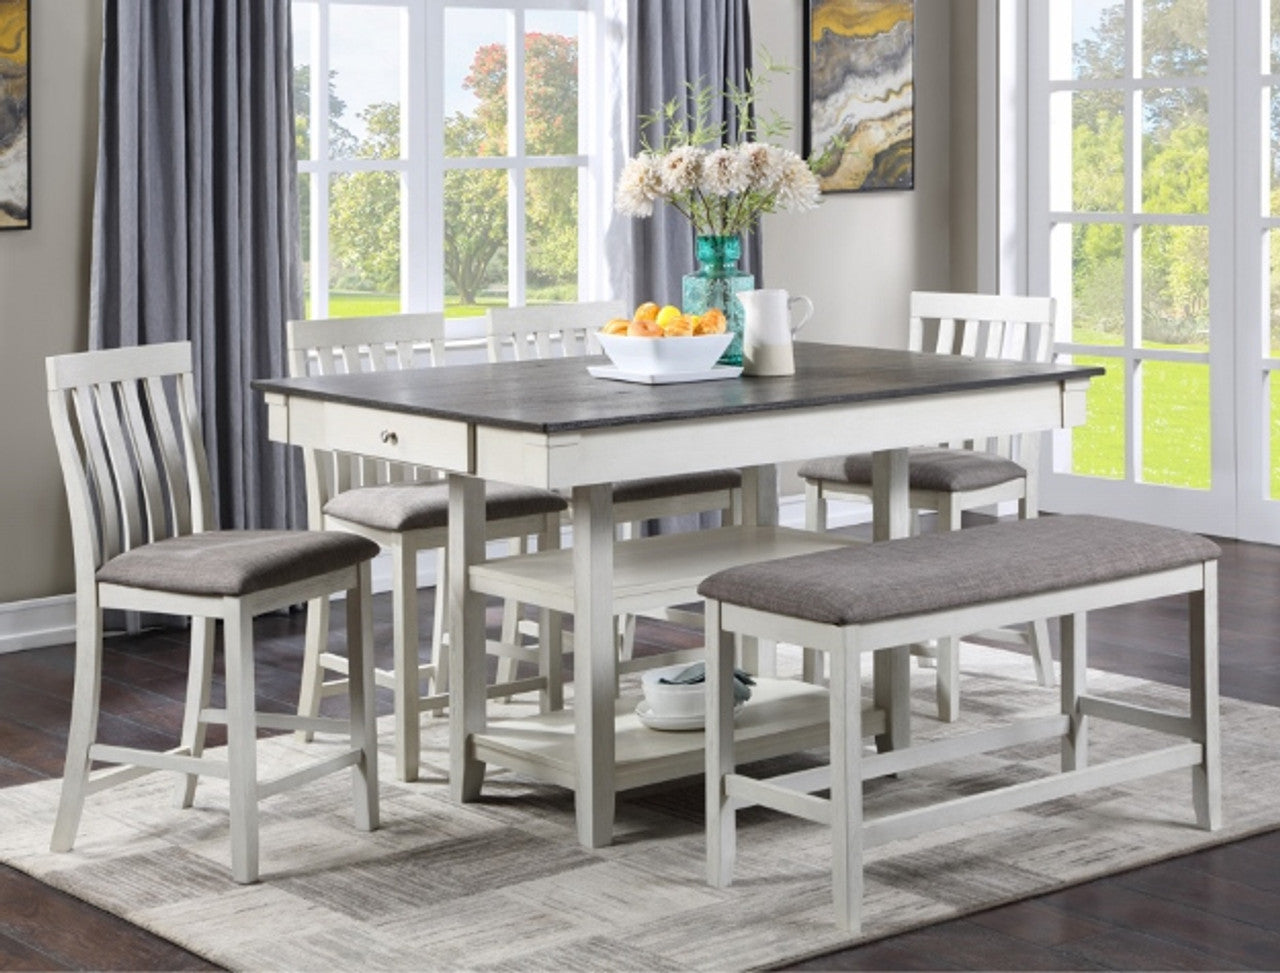 Chalk White and Gray Counter Storage Dining Set